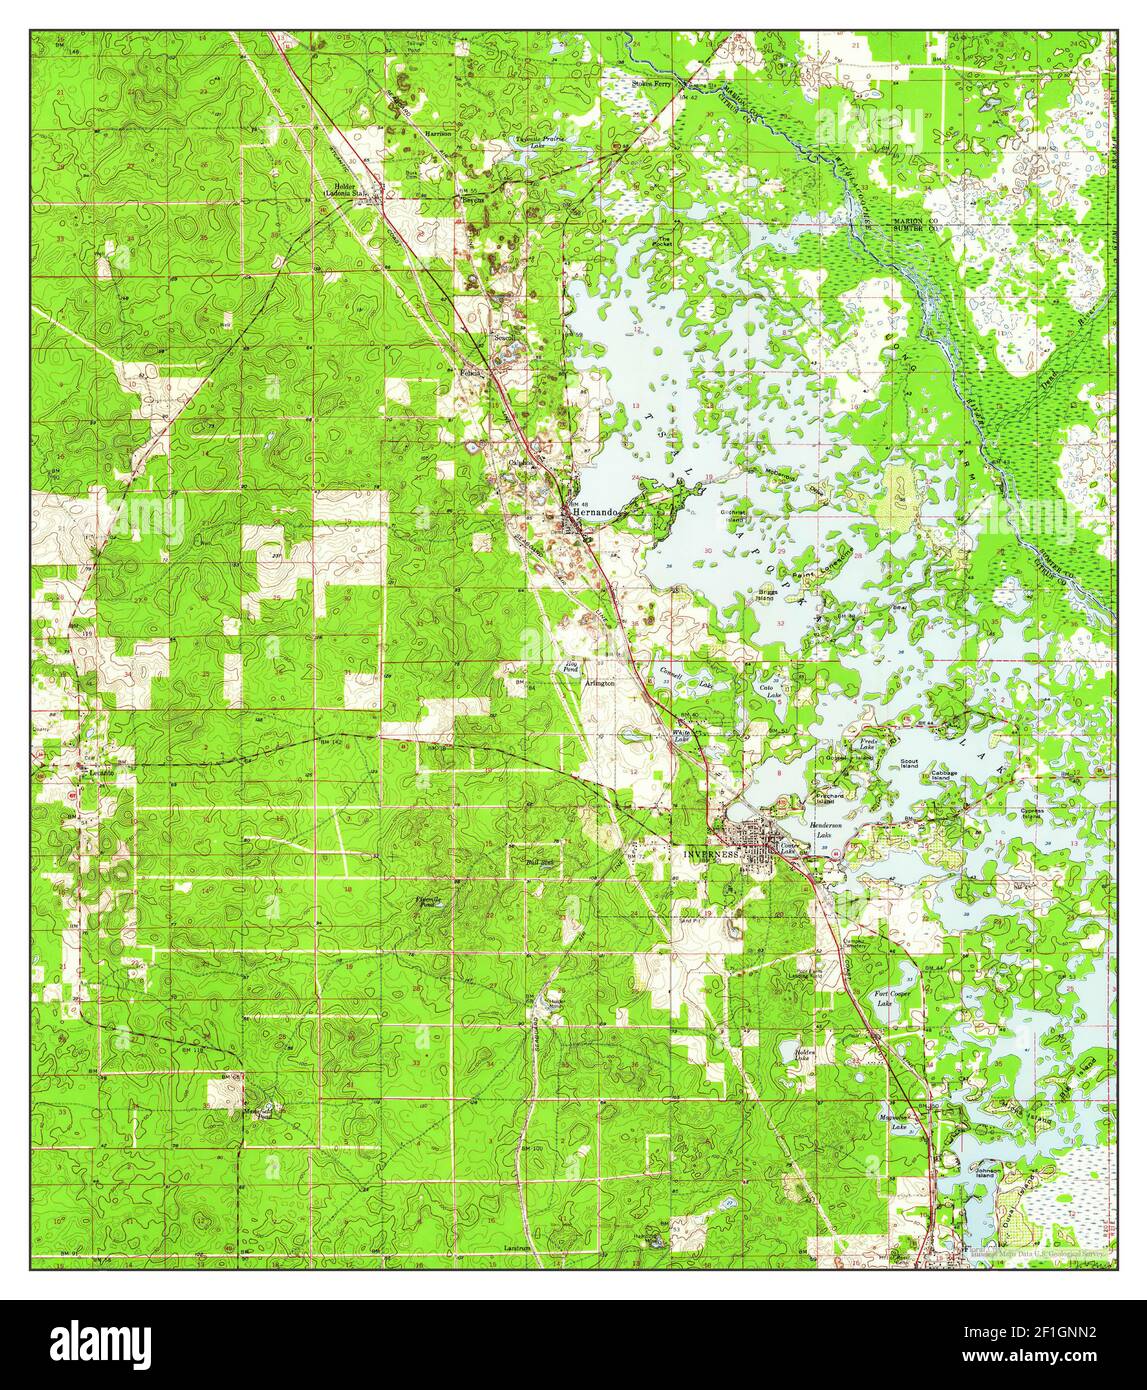 Inverness, Florida, map 1954, 1:62500, United States of America by Timeless Maps, data U.S. Geological Survey Stock Photo